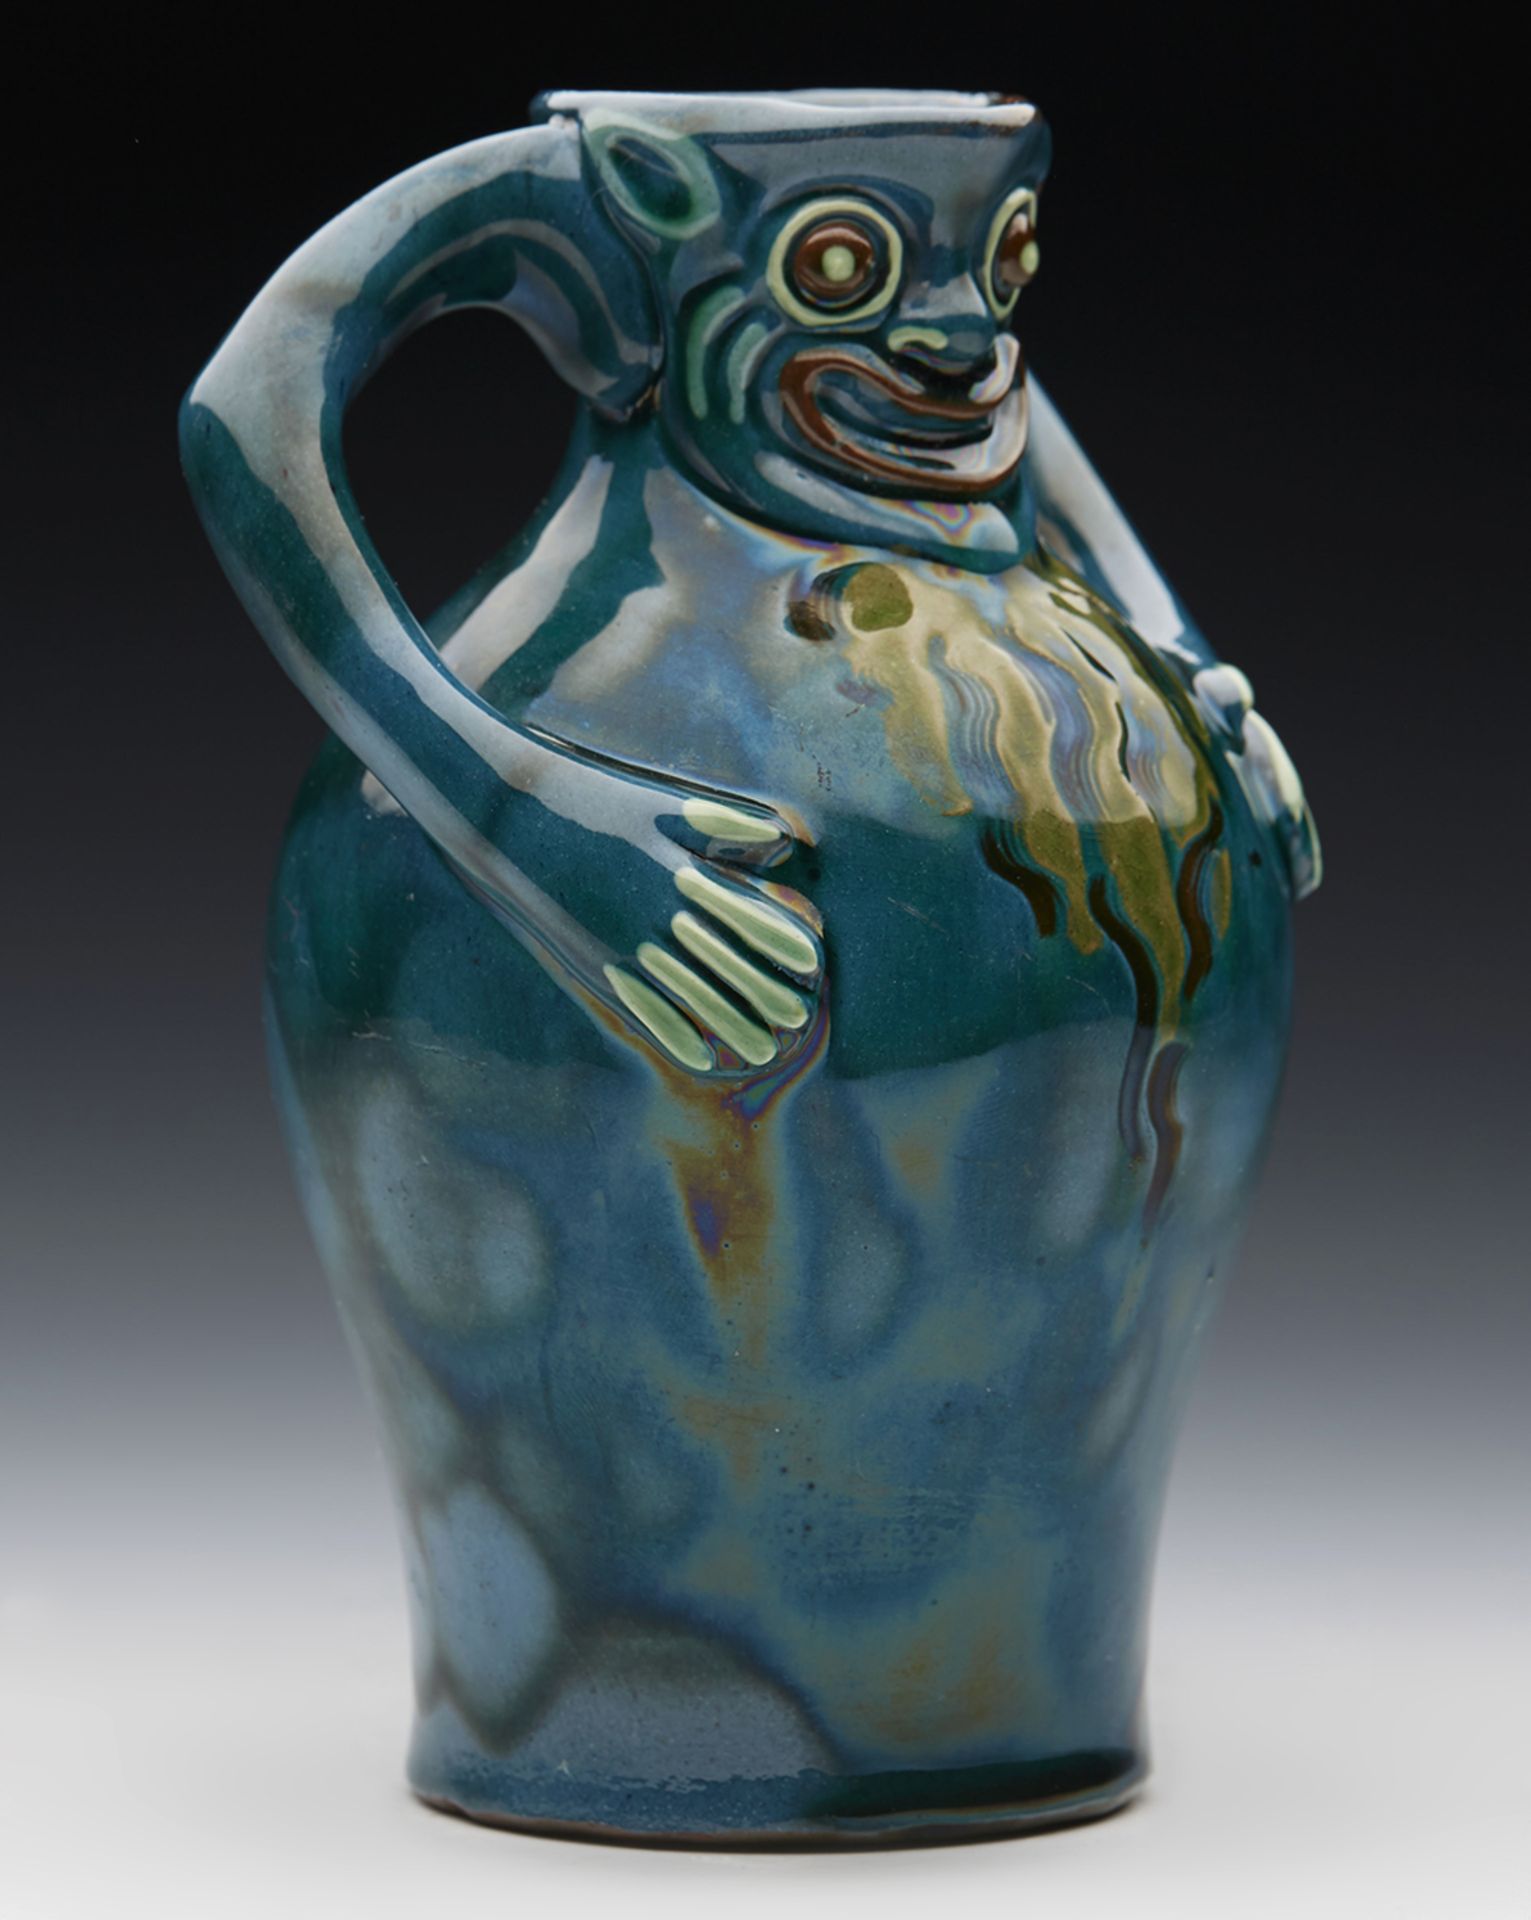 Antique Longpark Torquay Grotesque Jug By Blanche Vulliamy C.1900 - Image 3 of 7